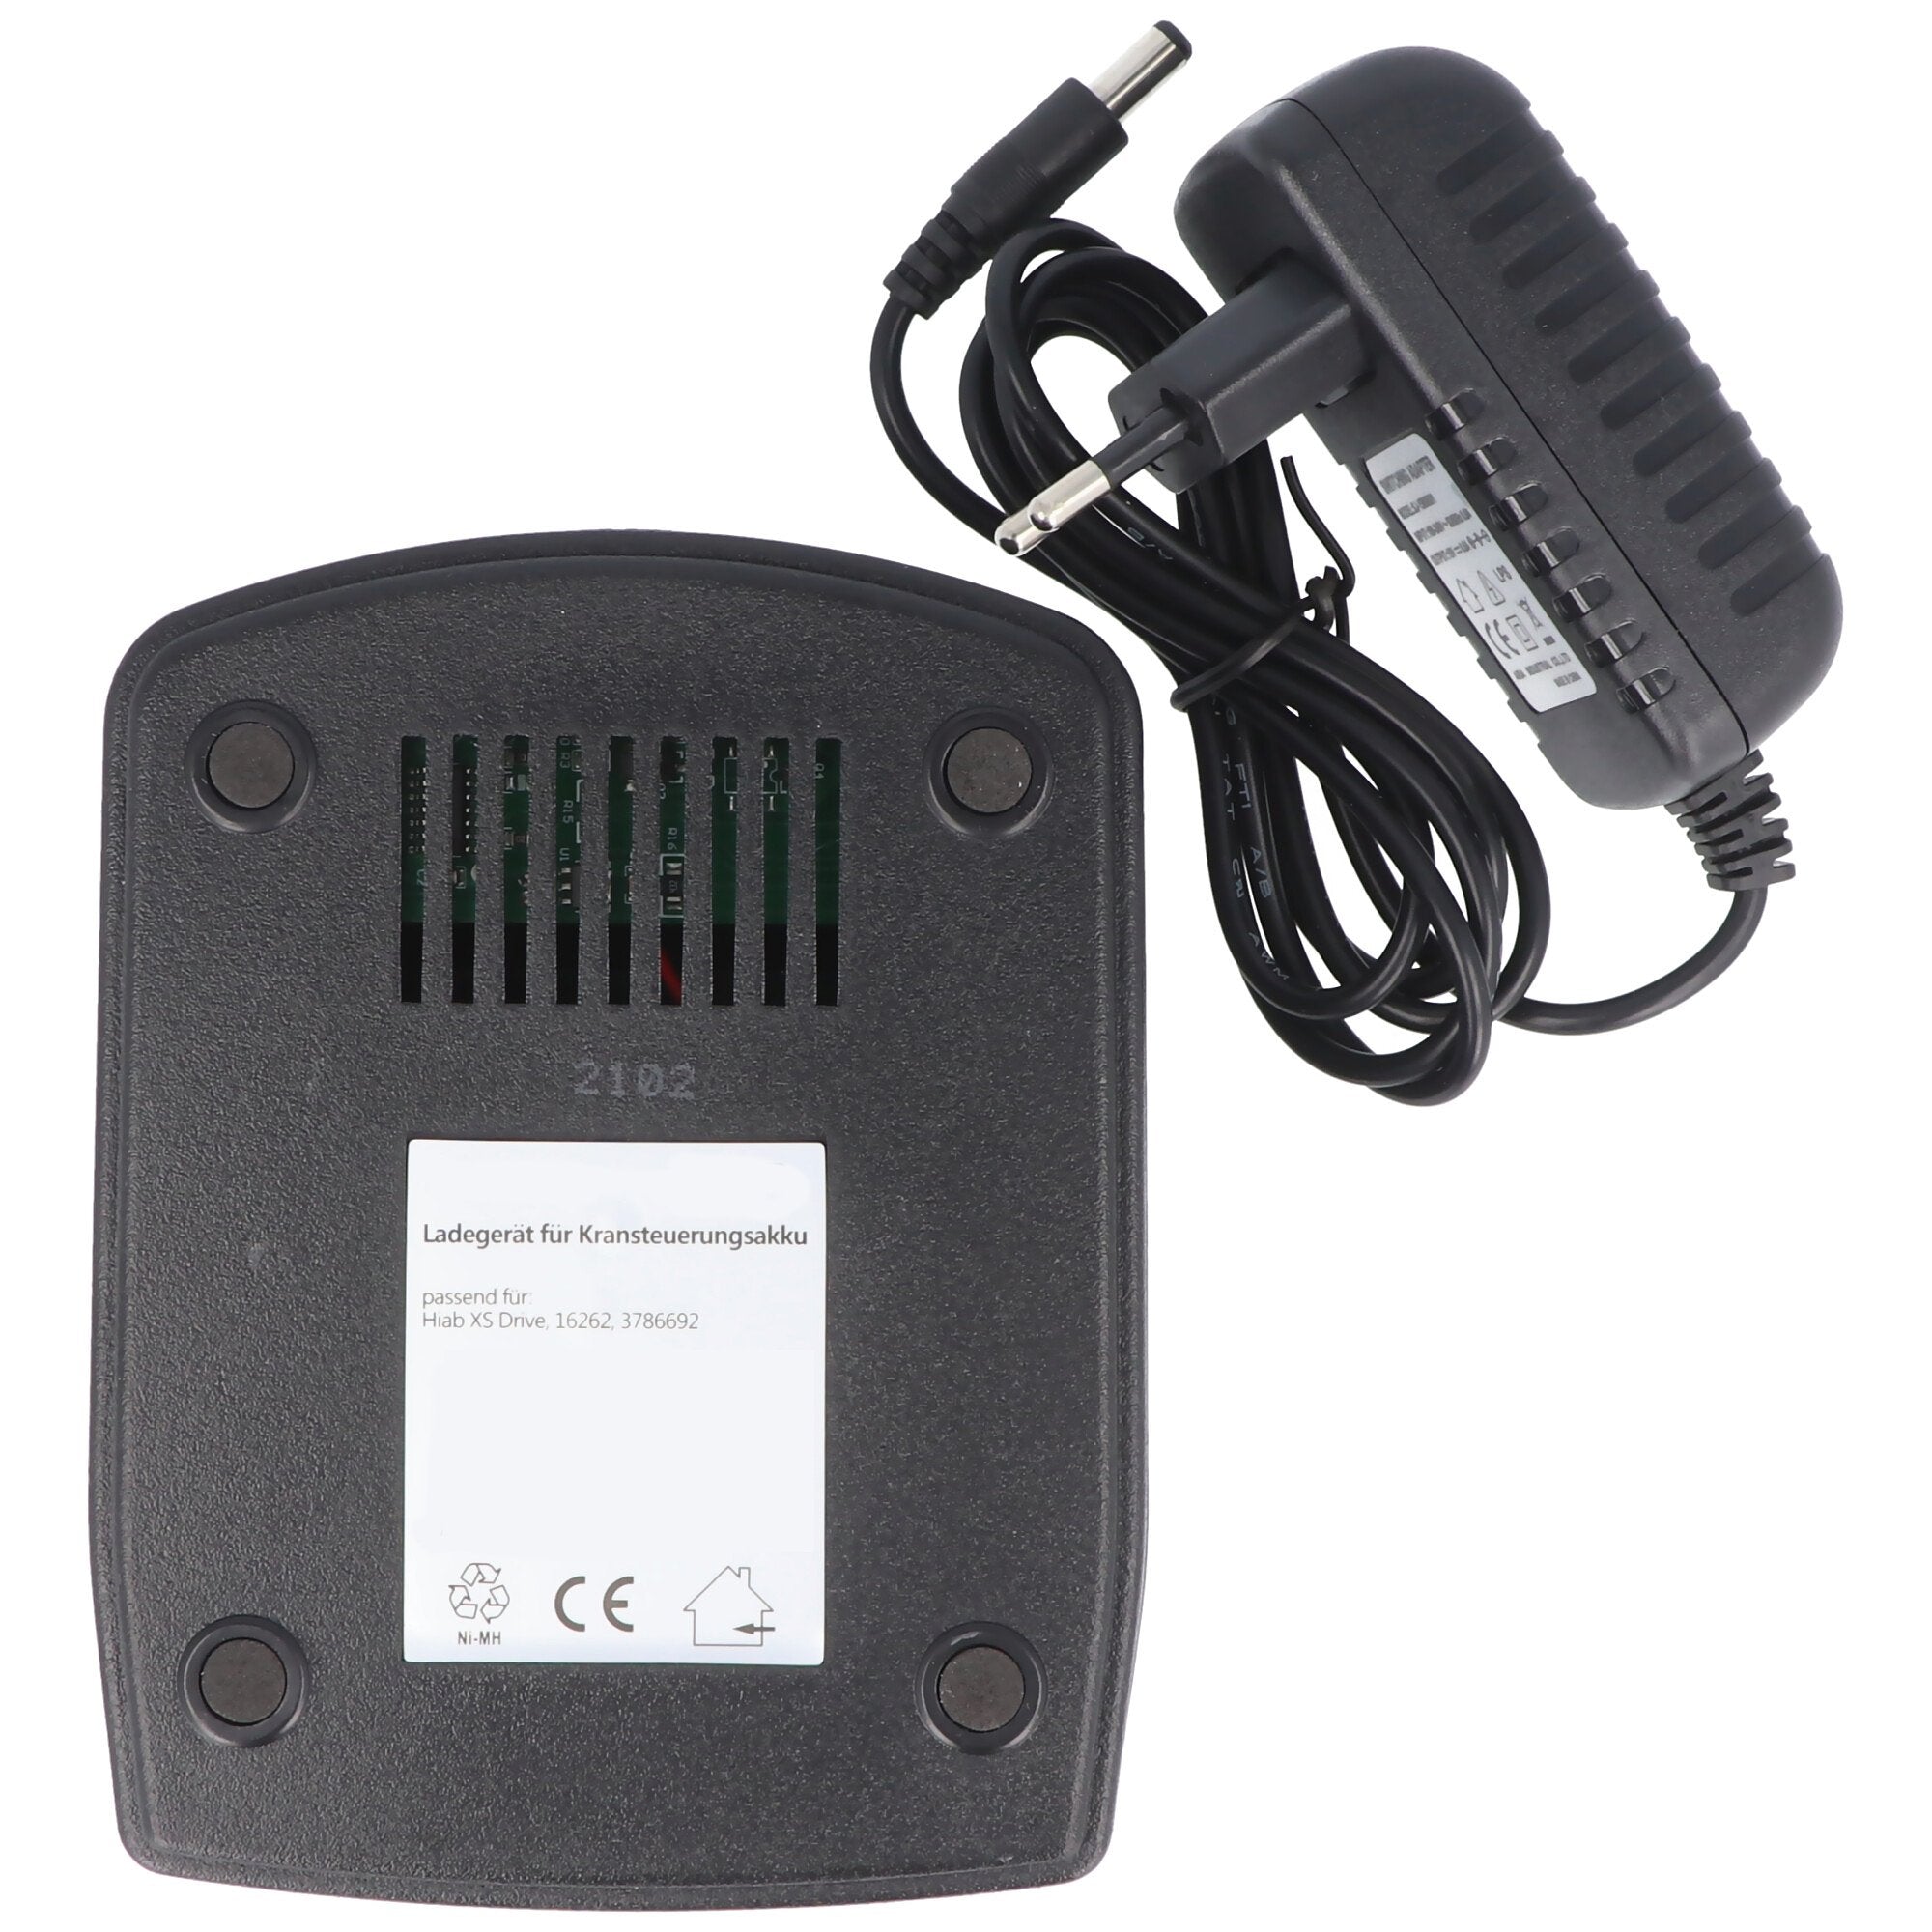 Fast charger exactly suitable for the Hiab XS Drive battery type 16262, 3786692